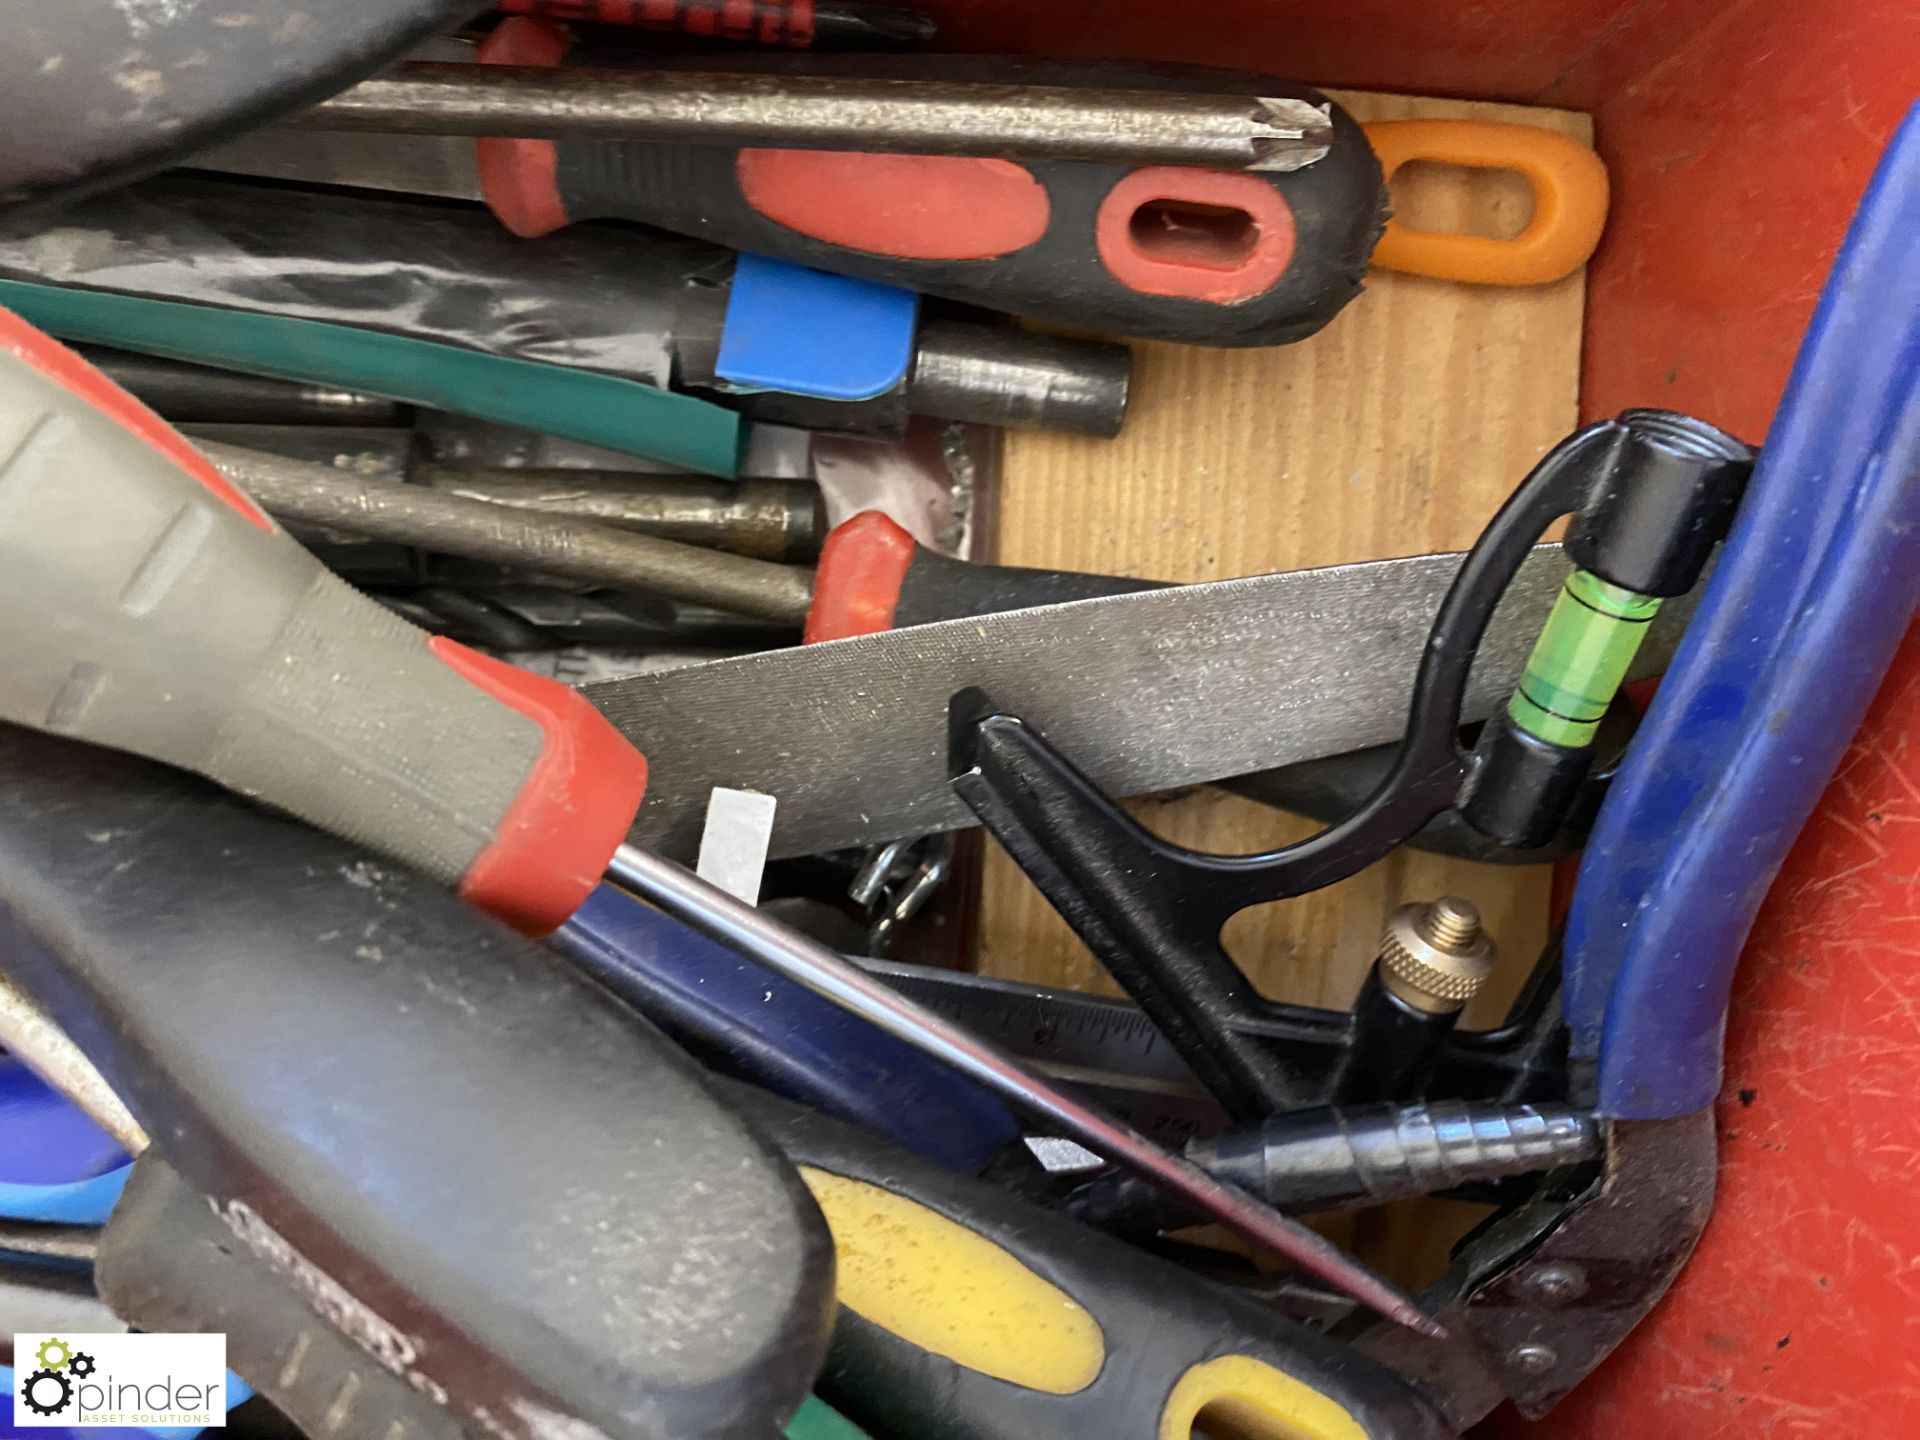 Tool Box and Contents, including screwdrivers, snips, files, etc - Image 5 of 6